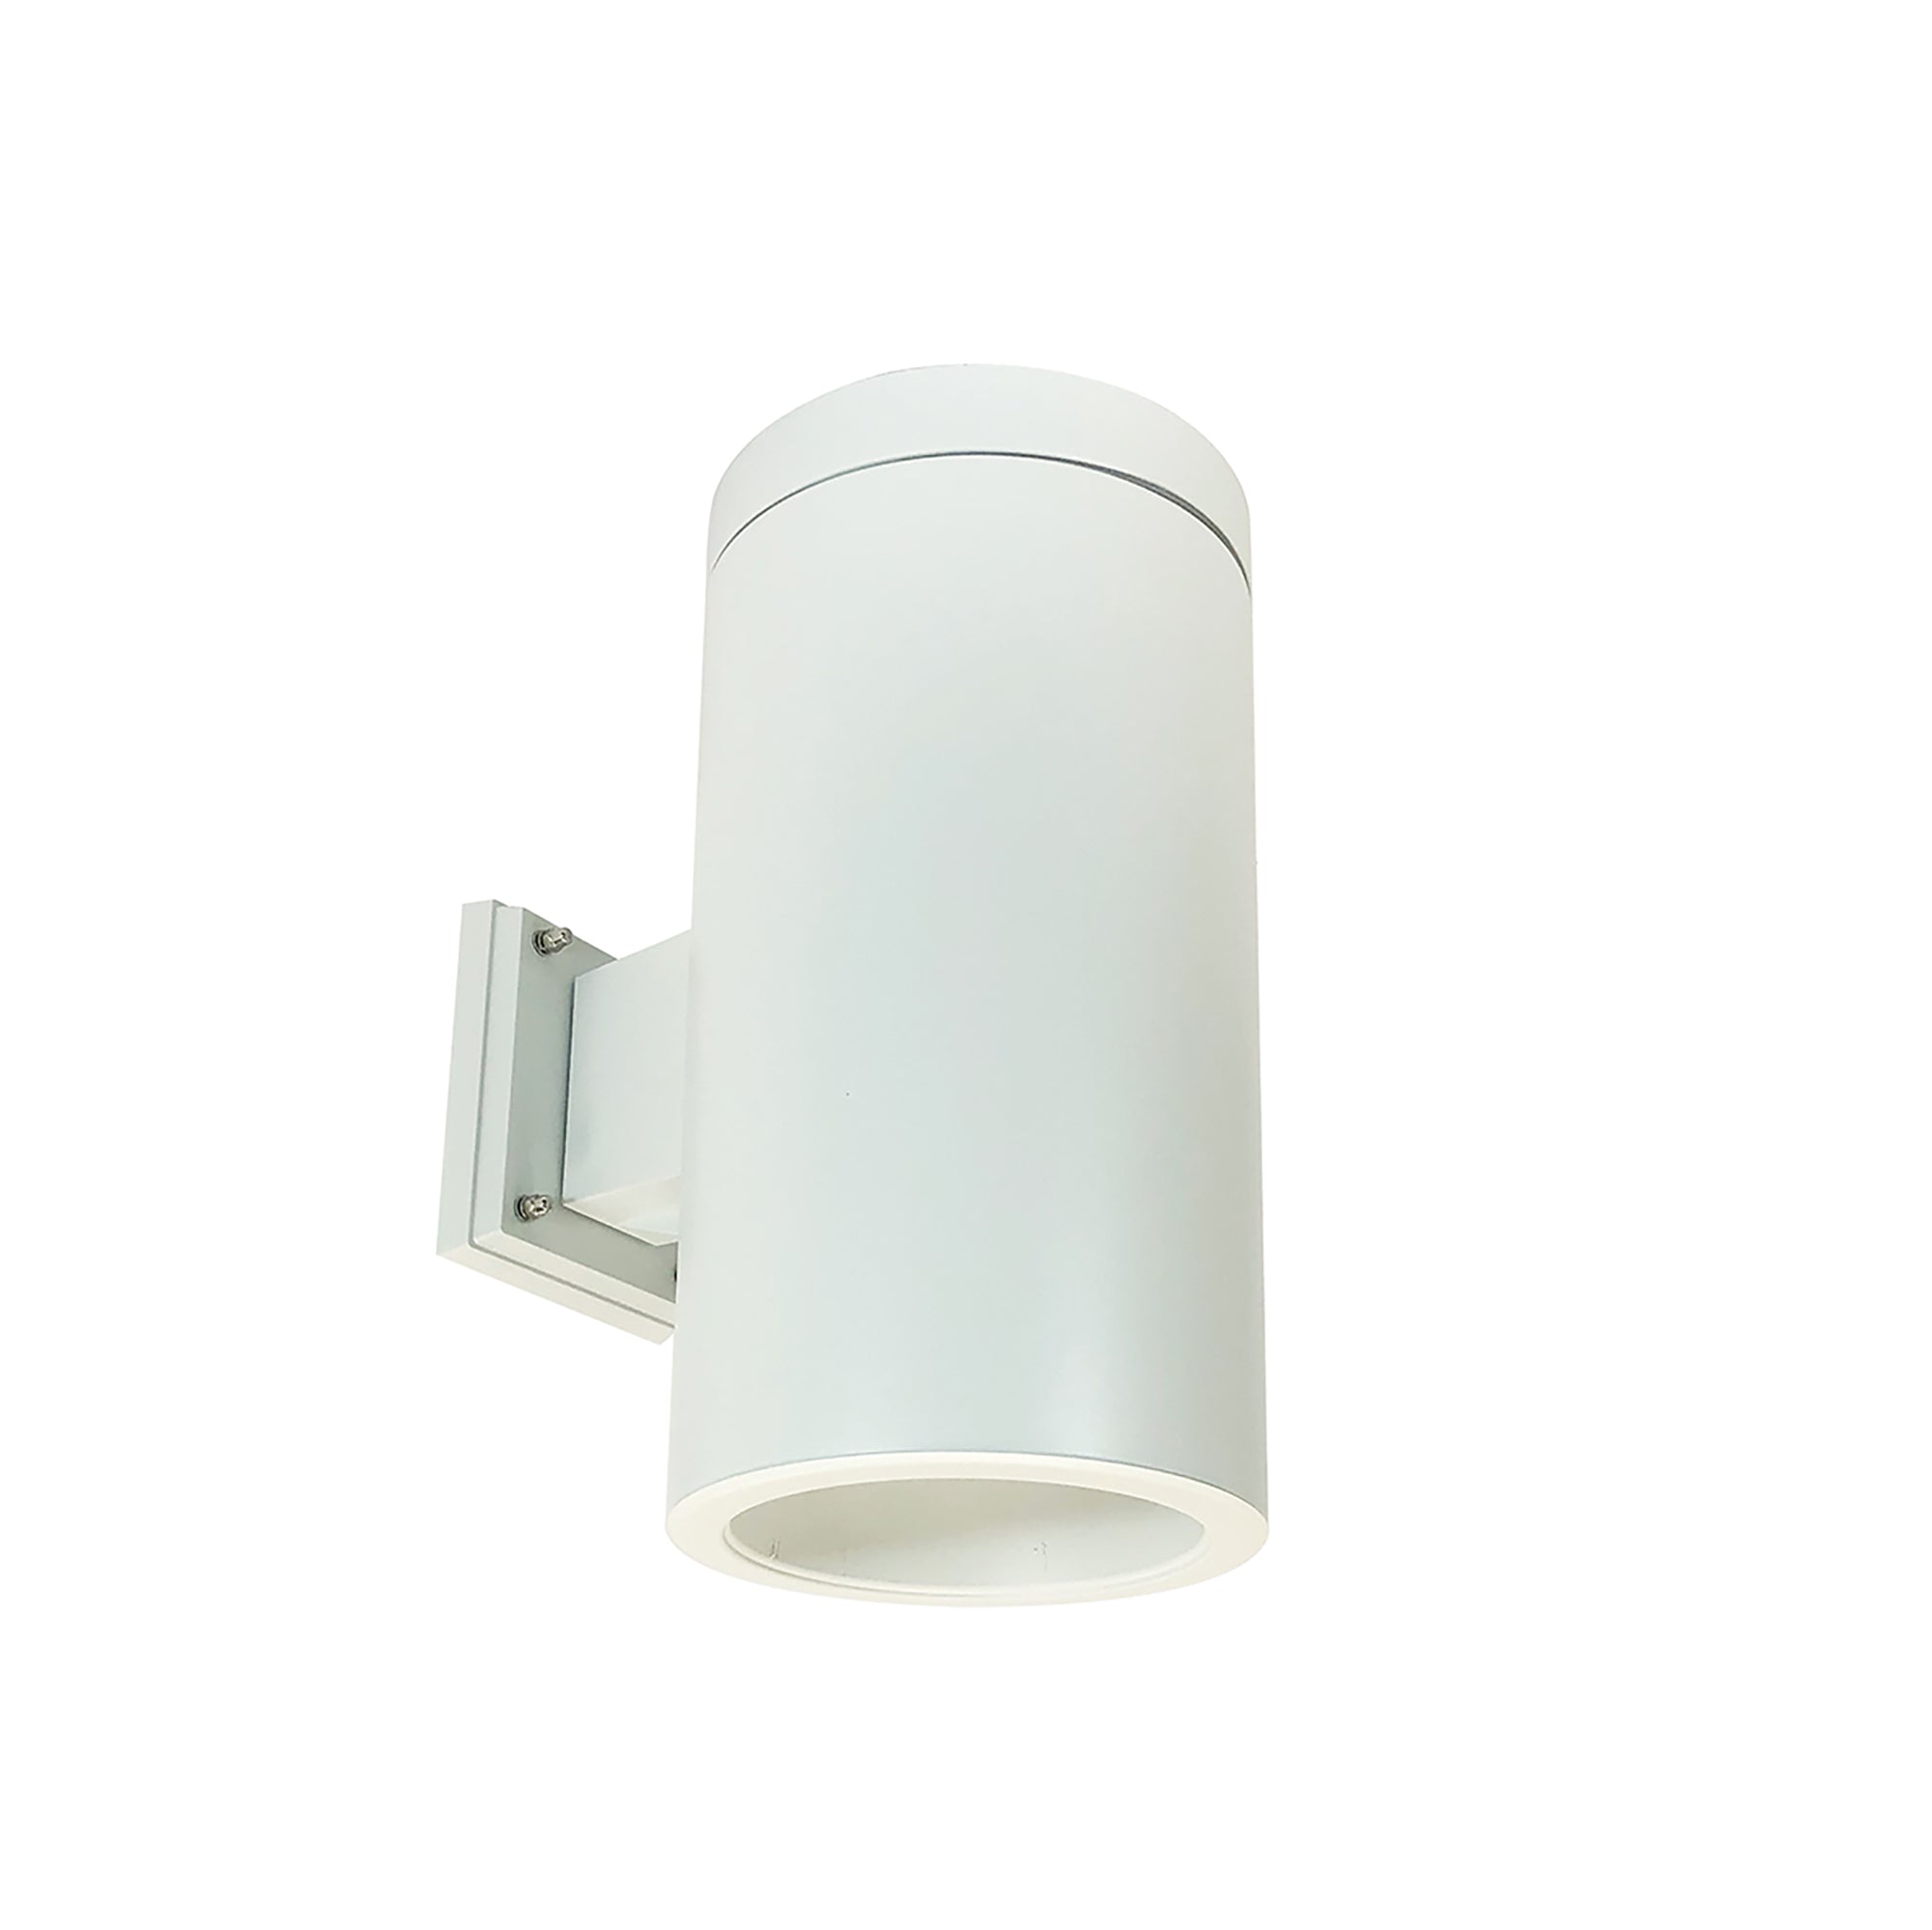 Nora Lighting NYLS2-6W09140MWWW6 - Cylinder - 6 Inch CYL WALL 900LM MED REF 40K WH/WH WH CYL 120/277V 0-10V